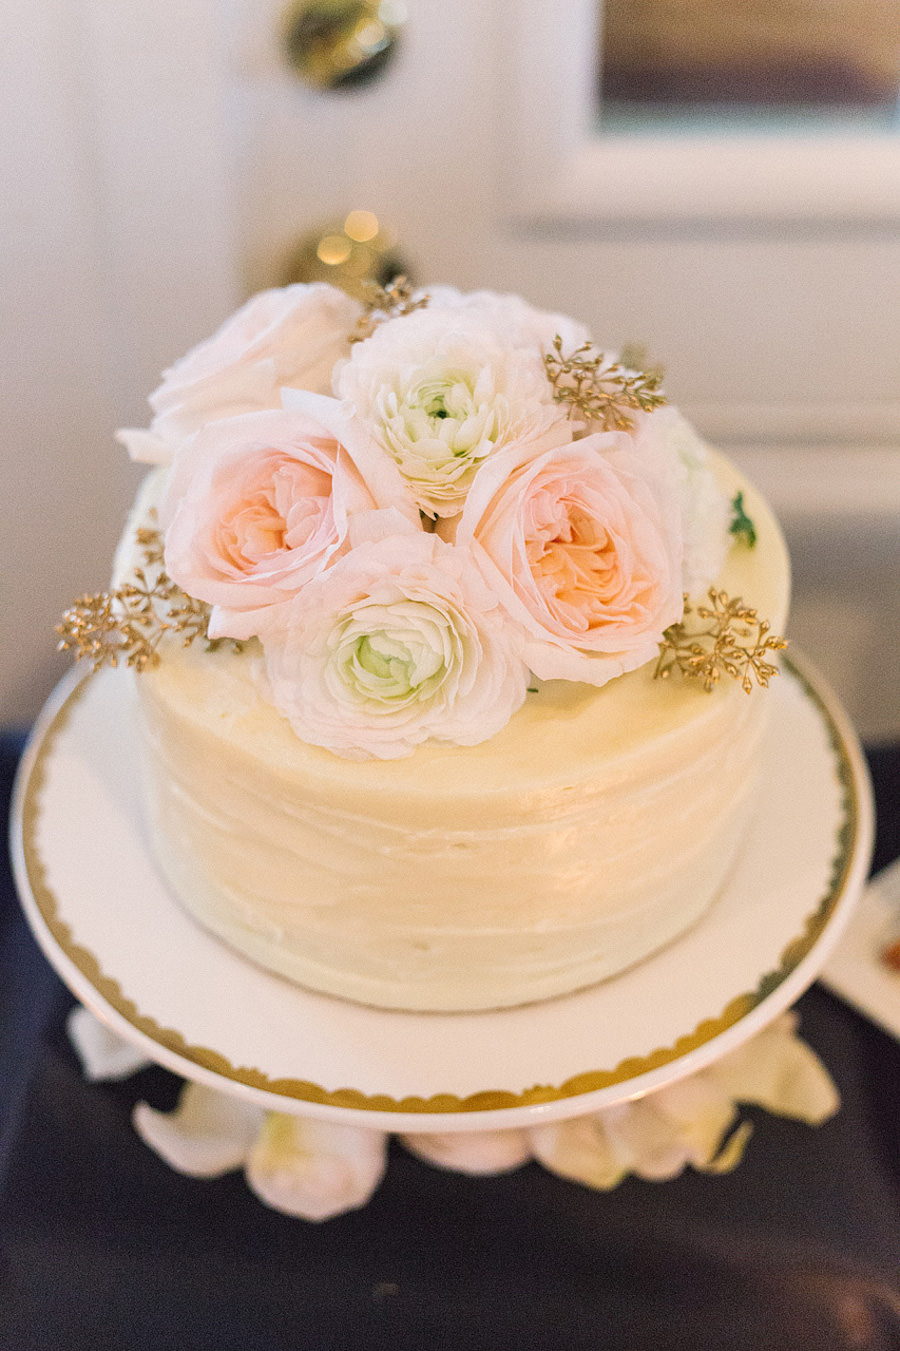 Single Tier, Round White Wedding Cake with Blush Pink and Ivory Accent Roses